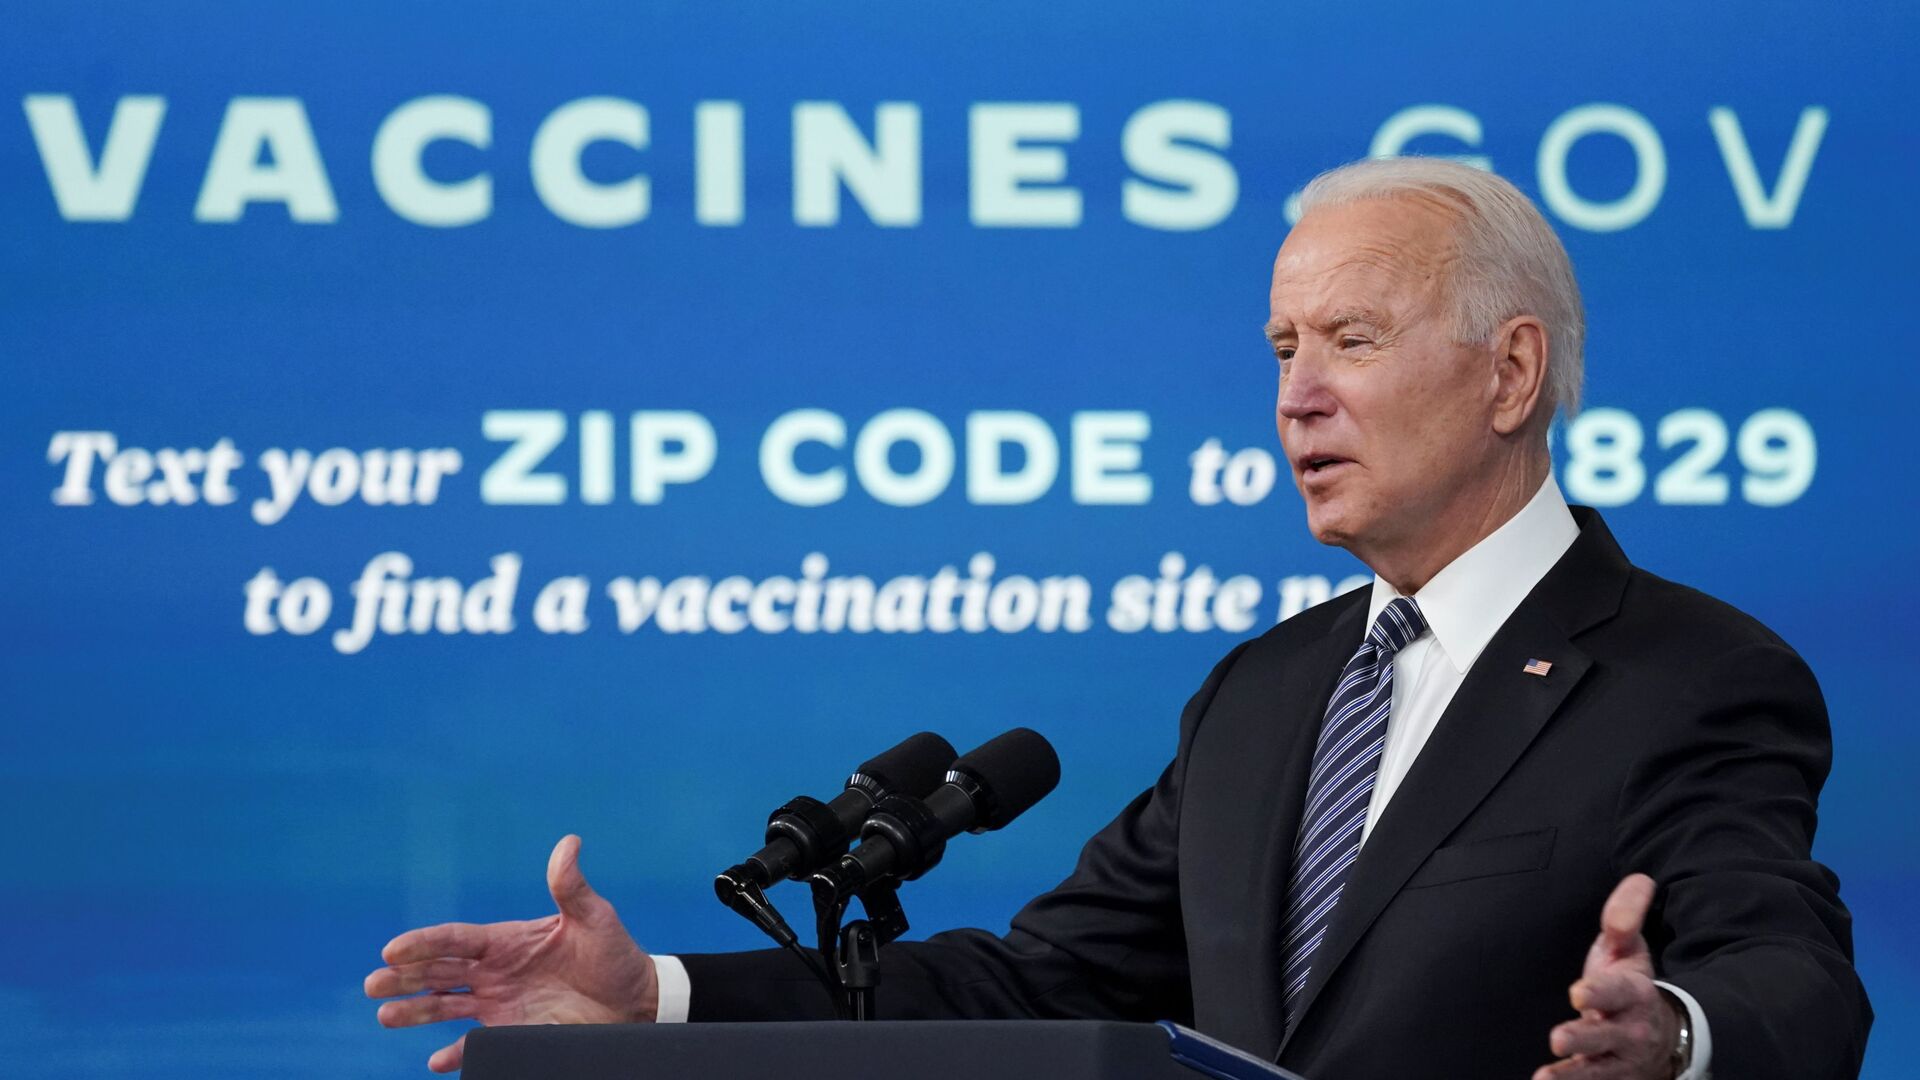 US President Joe Biden speaks about the COVID-19 response and vaccination programme at the White House in Washington, US, 12 May 2021. REUTERS/Kevin Lamarque - Sputnik International, 1920, 13.05.2021